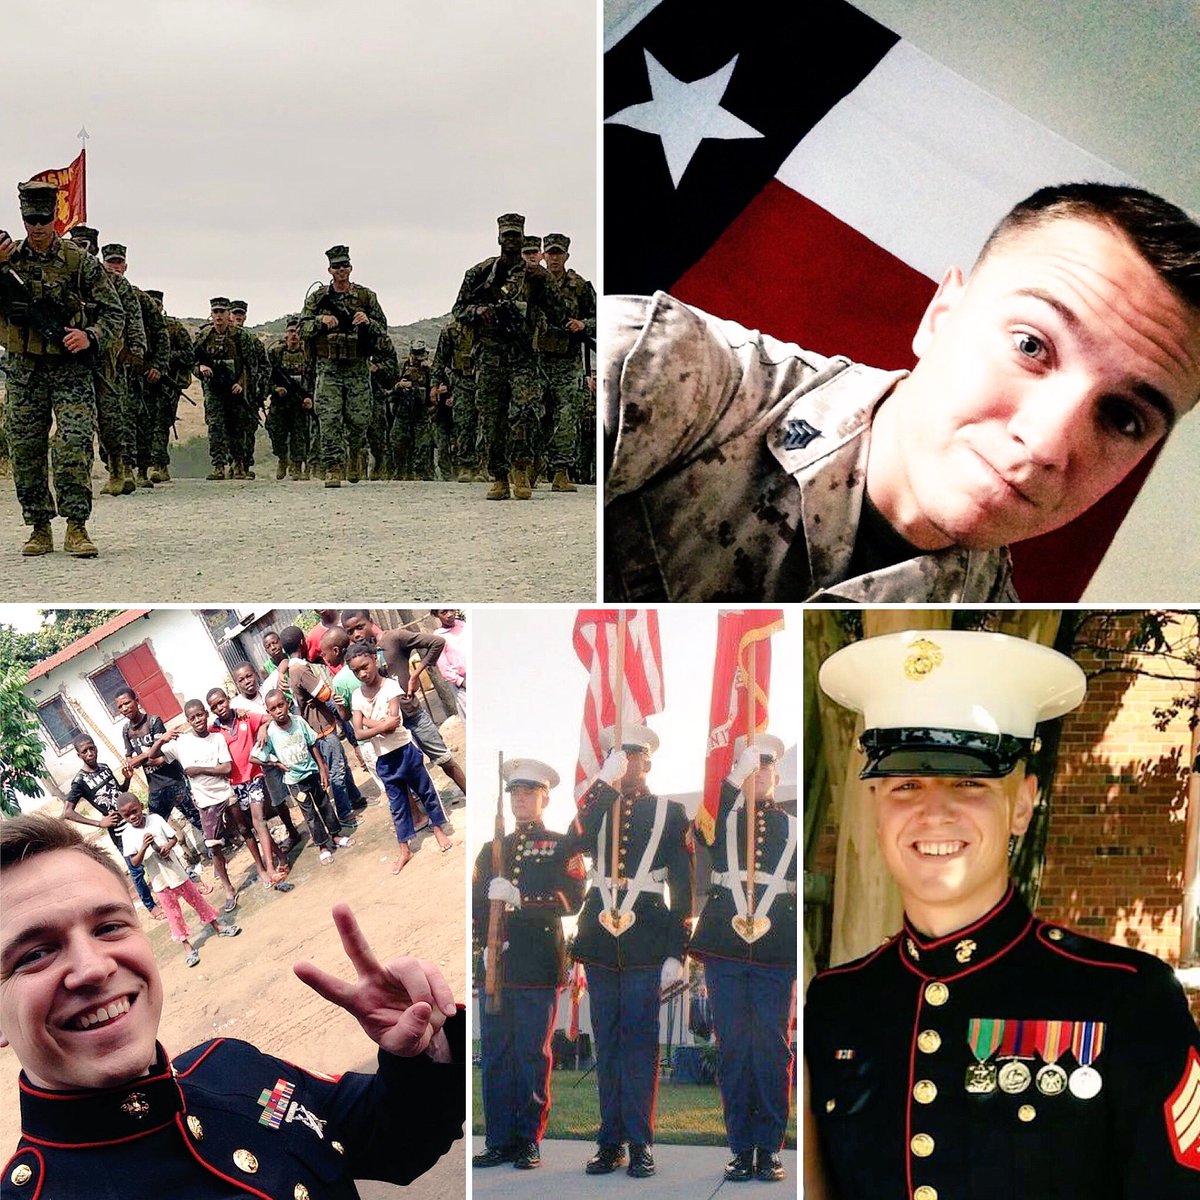 Thank you son for all that you do! #MobilizeForService #HatsOff4Heroes #SemperFi #MarineMom @TMobile